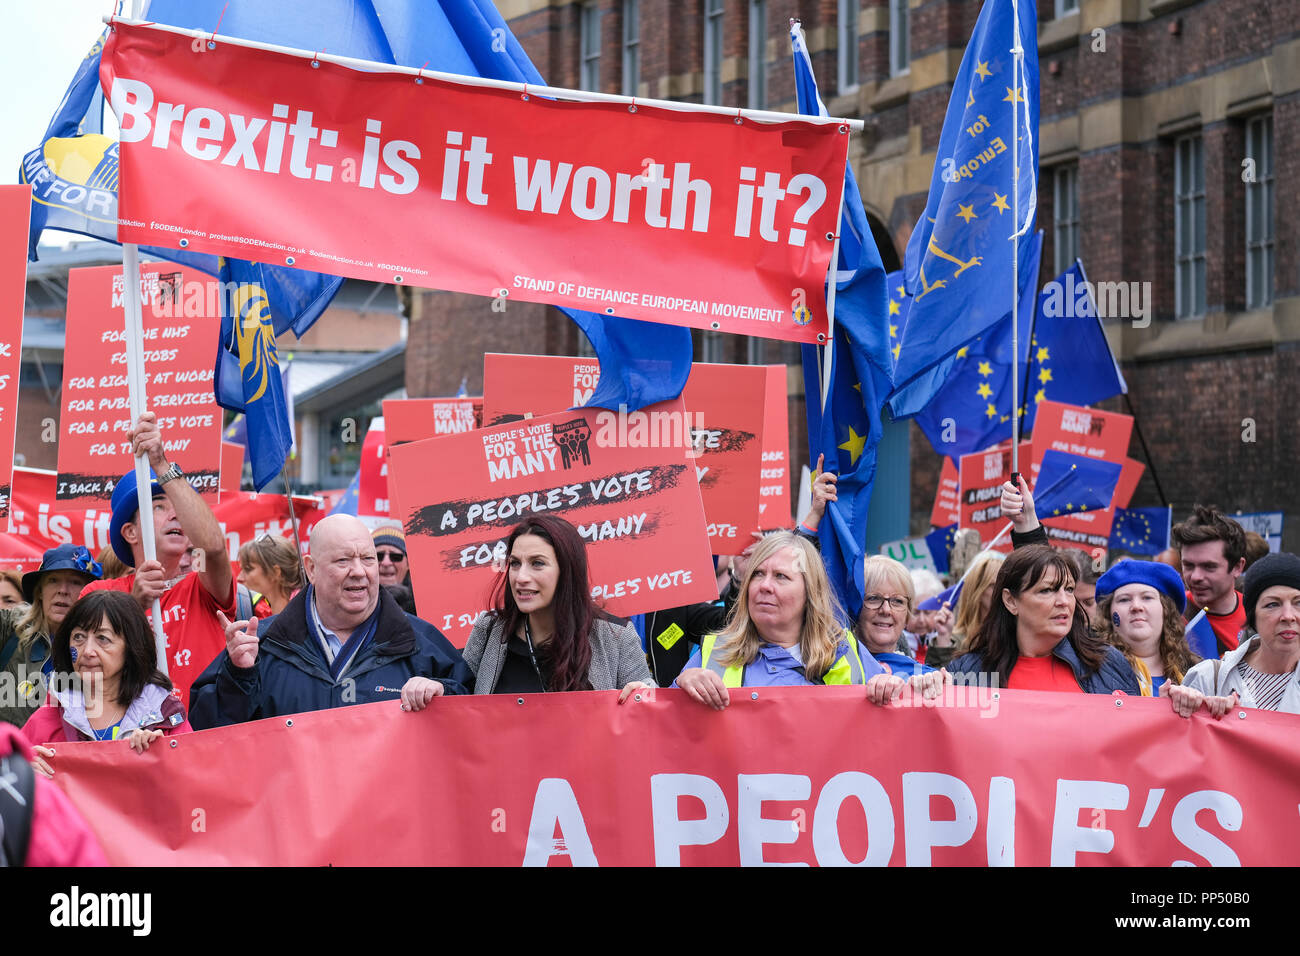 Liverpool, UK. 23rd Sept 2018. Thousands of demonstrators have marched through Liverpool city centre on Sunday, September 23, 2018, calling for a 'People's Vote' on the final Brexit deal. The demonstration coincides with the start of the Labour Party Conference which is being held in the city. © Christopher Middleton/Alamy Live News Stock Photo